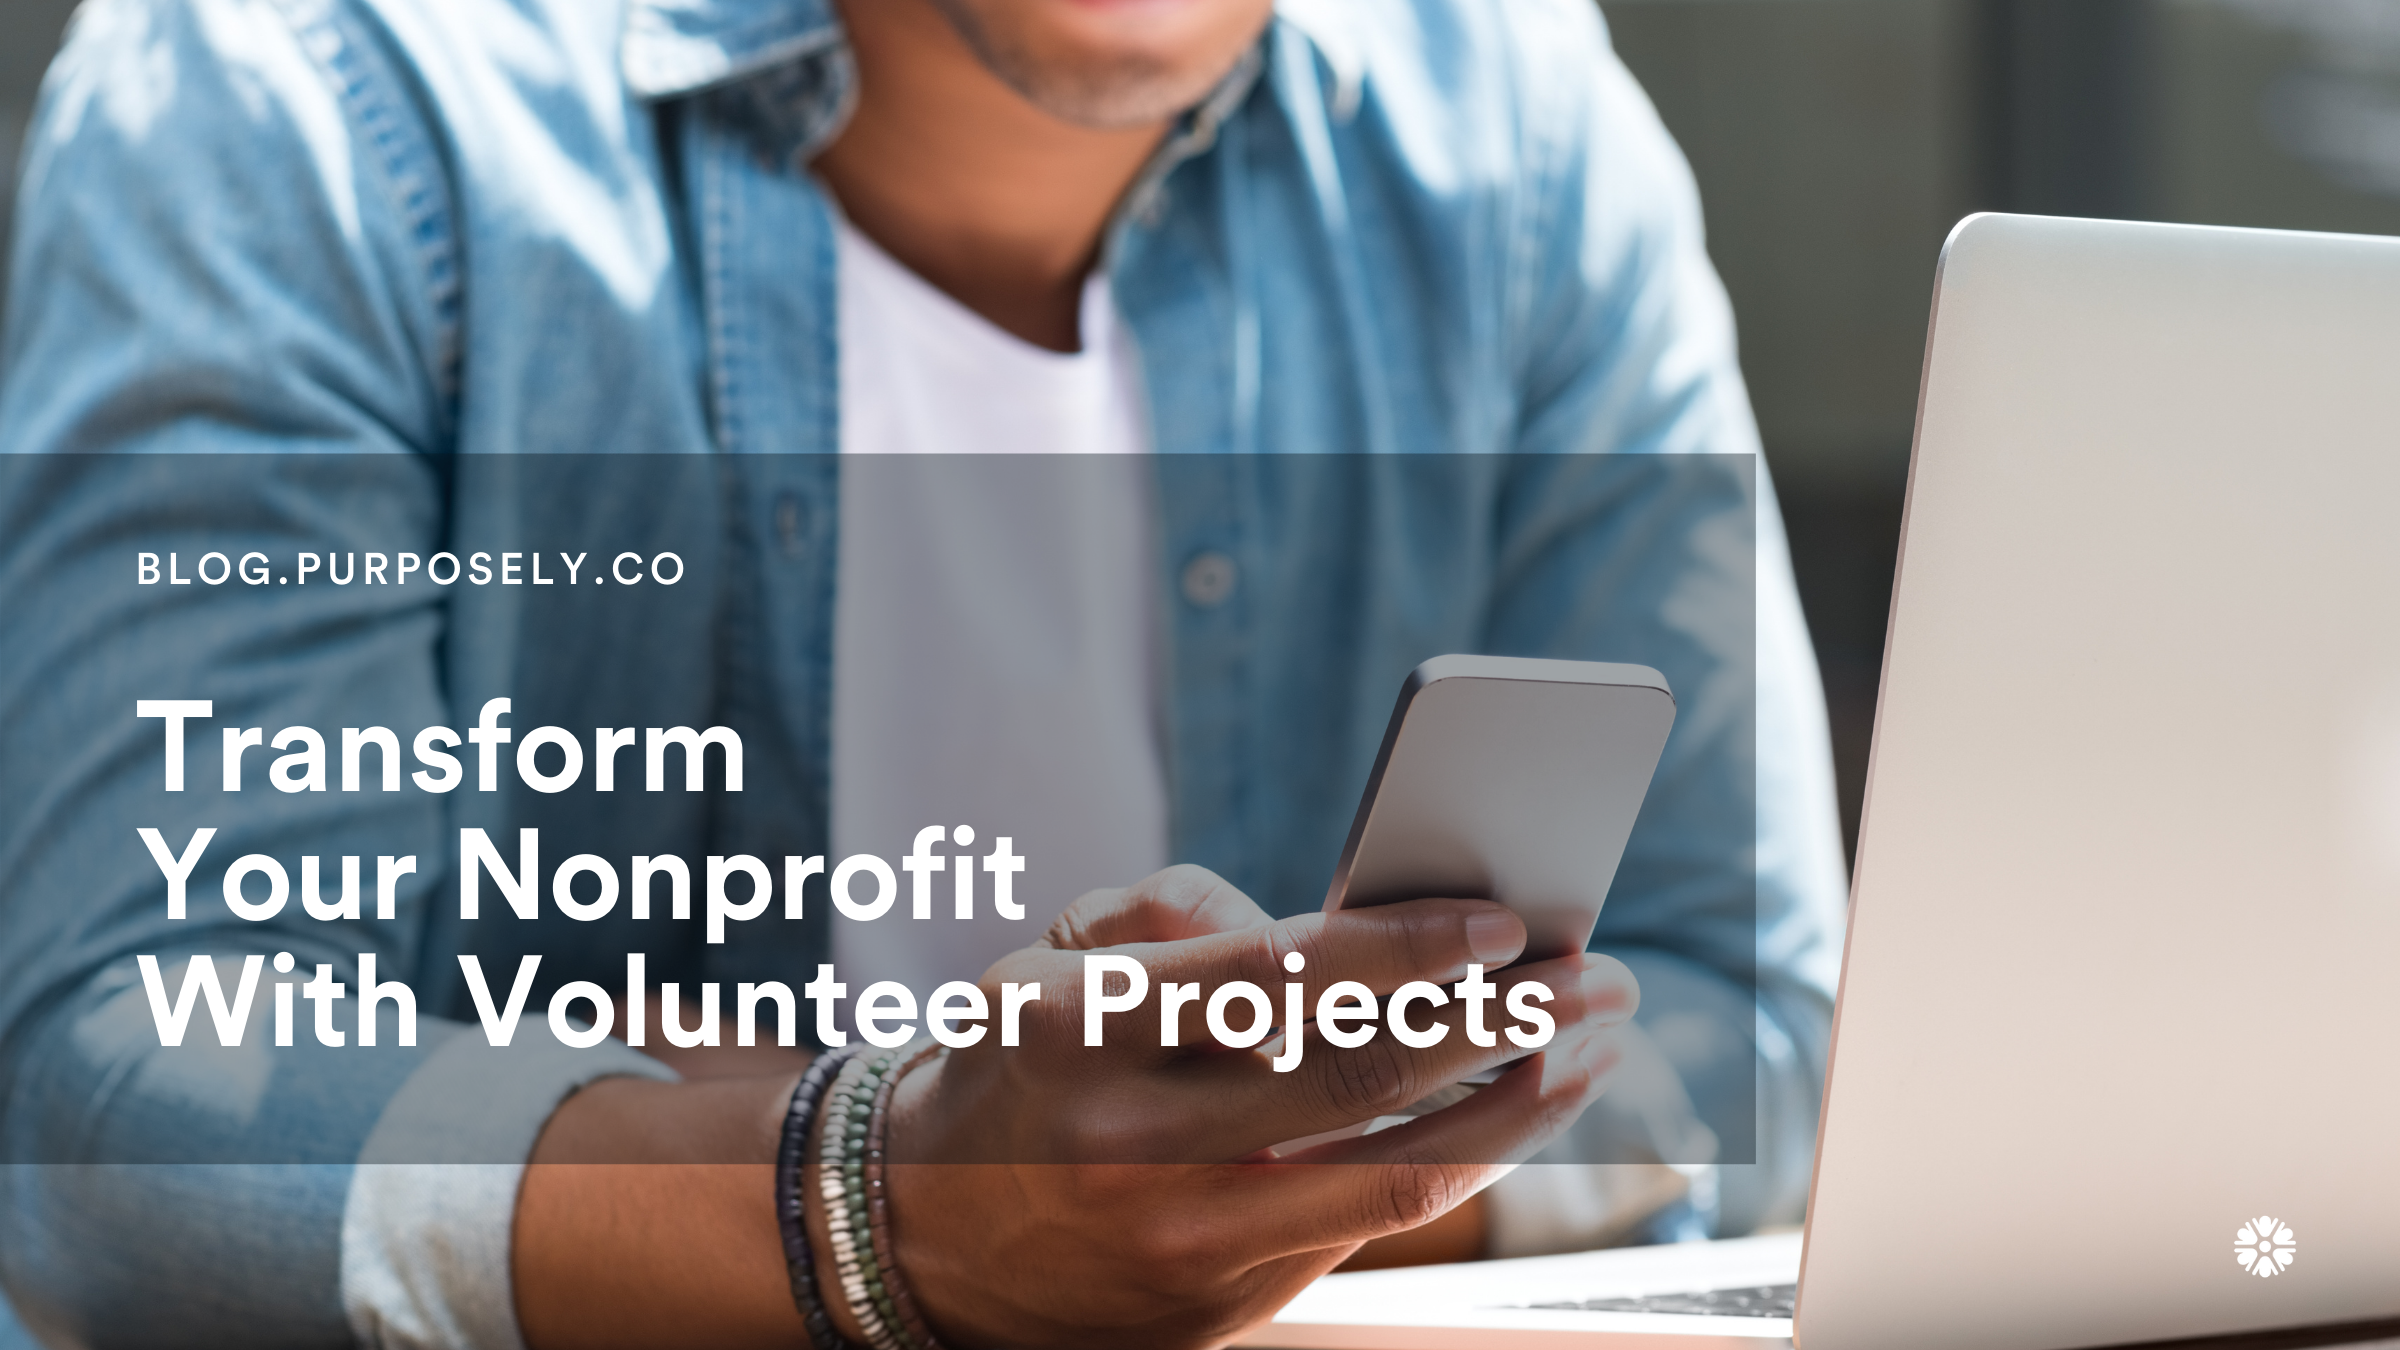 4 Steps to Transform Your Nonprofit With Projects